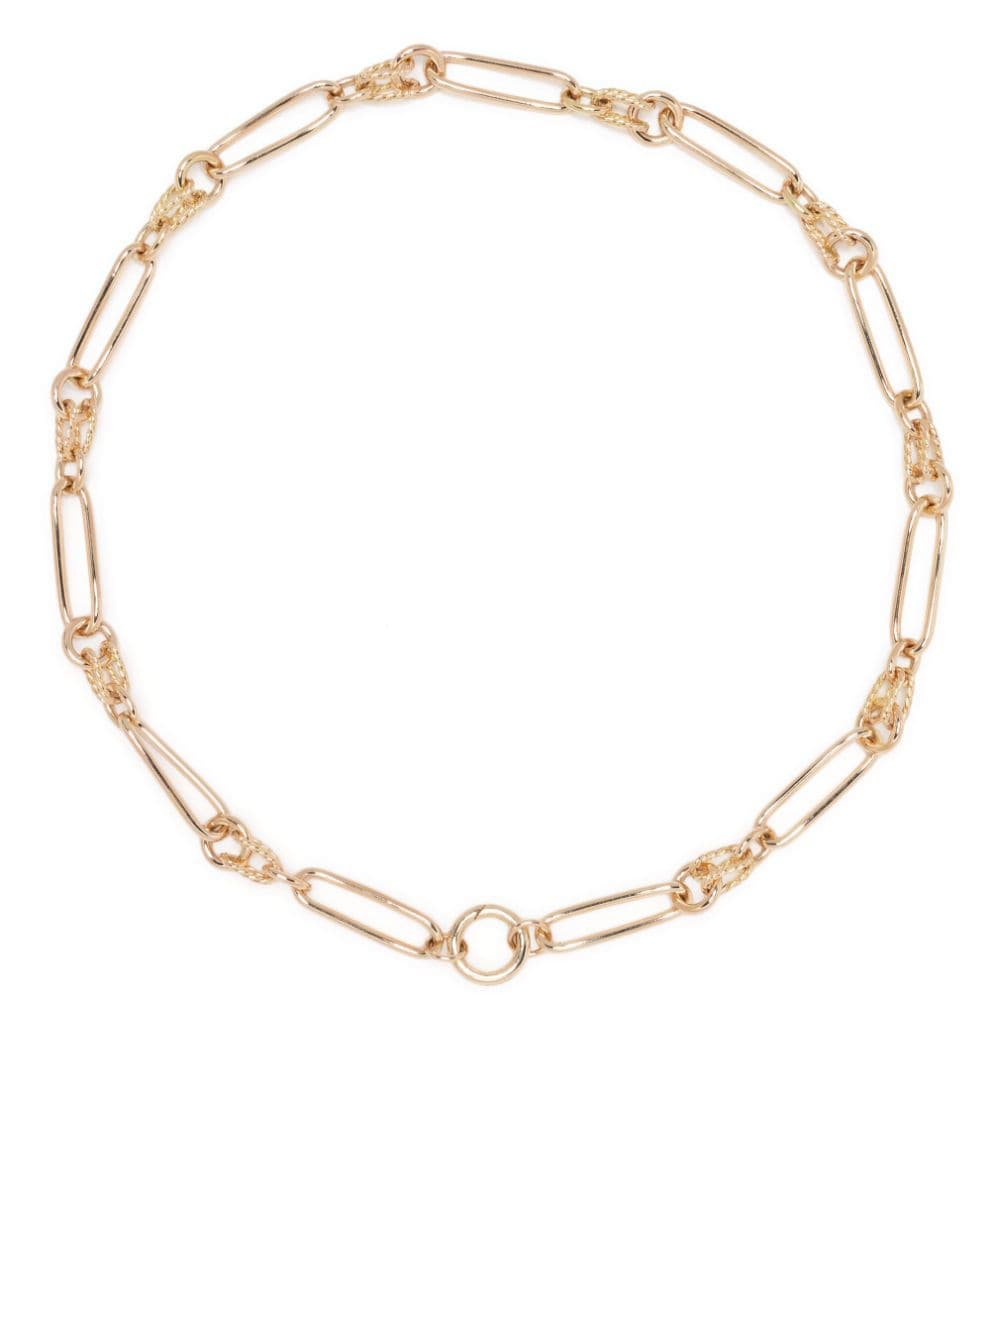 Lucy Delius Jewellery 14kt yellow gold Twisted Link necklace von Lucy Delius Jewellery